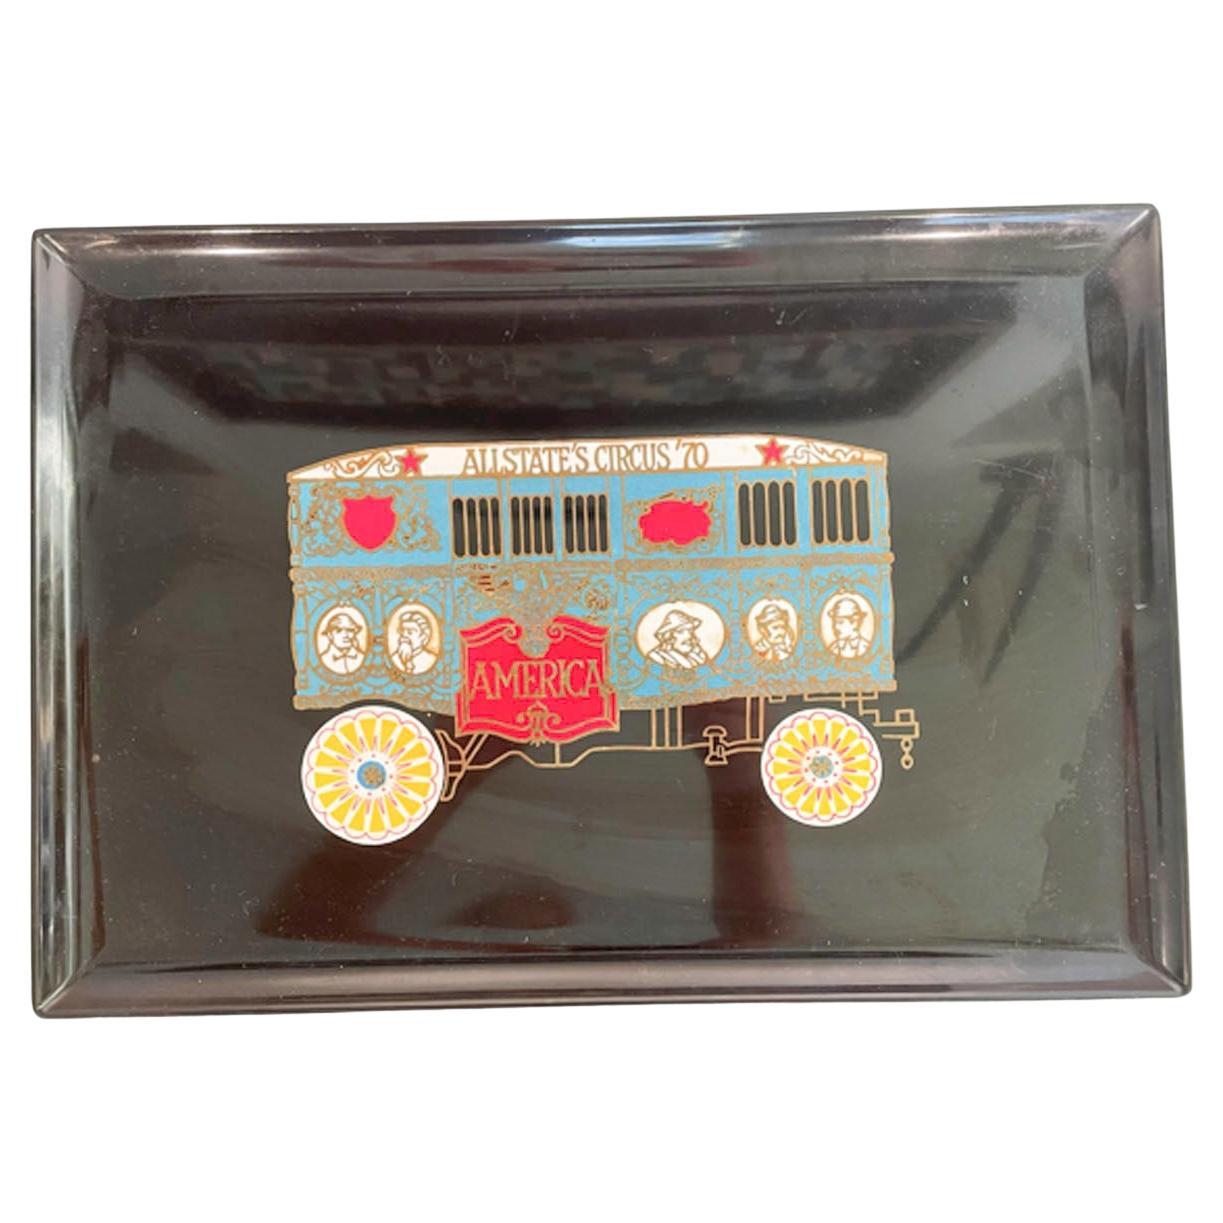 Vintage Couroc Phenolic Resin Serving Tray with Circus Train Inlay